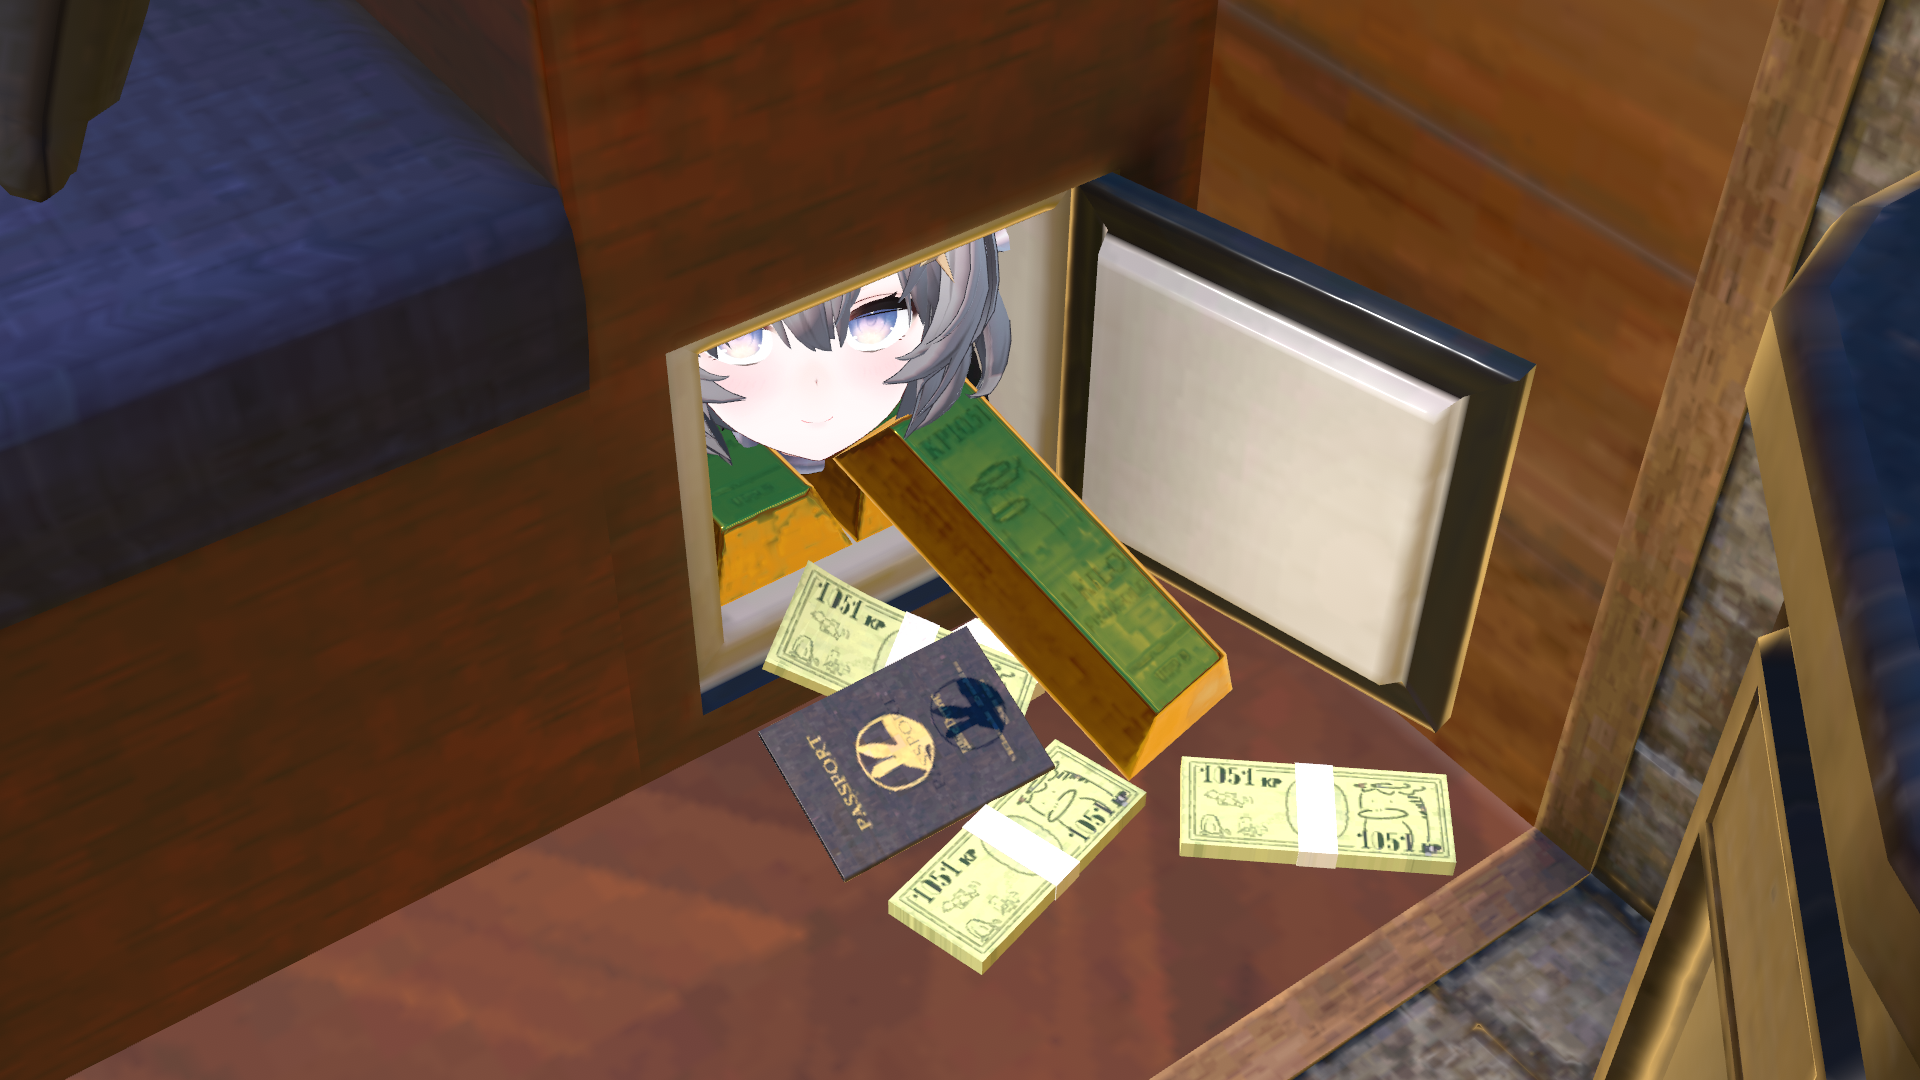 VRChat_1920x1080_2021-12-05_03-00-28.998.png